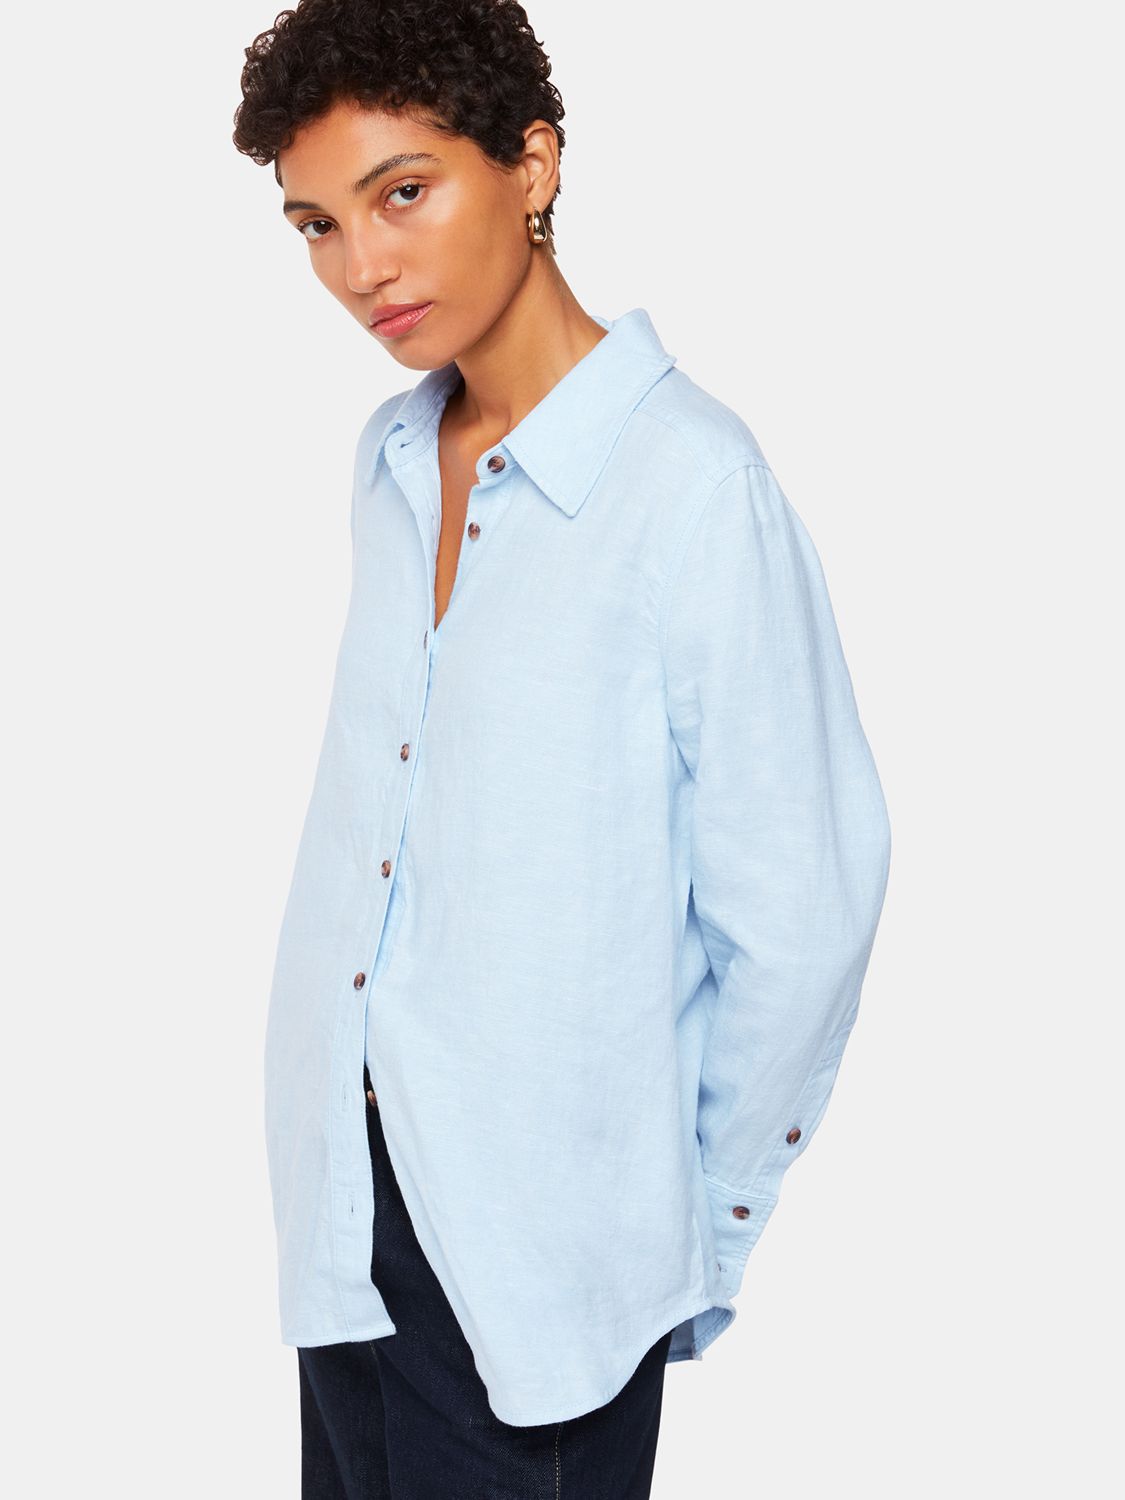 Whistles Relaxed Fit Linen Shirt, Blue, 10